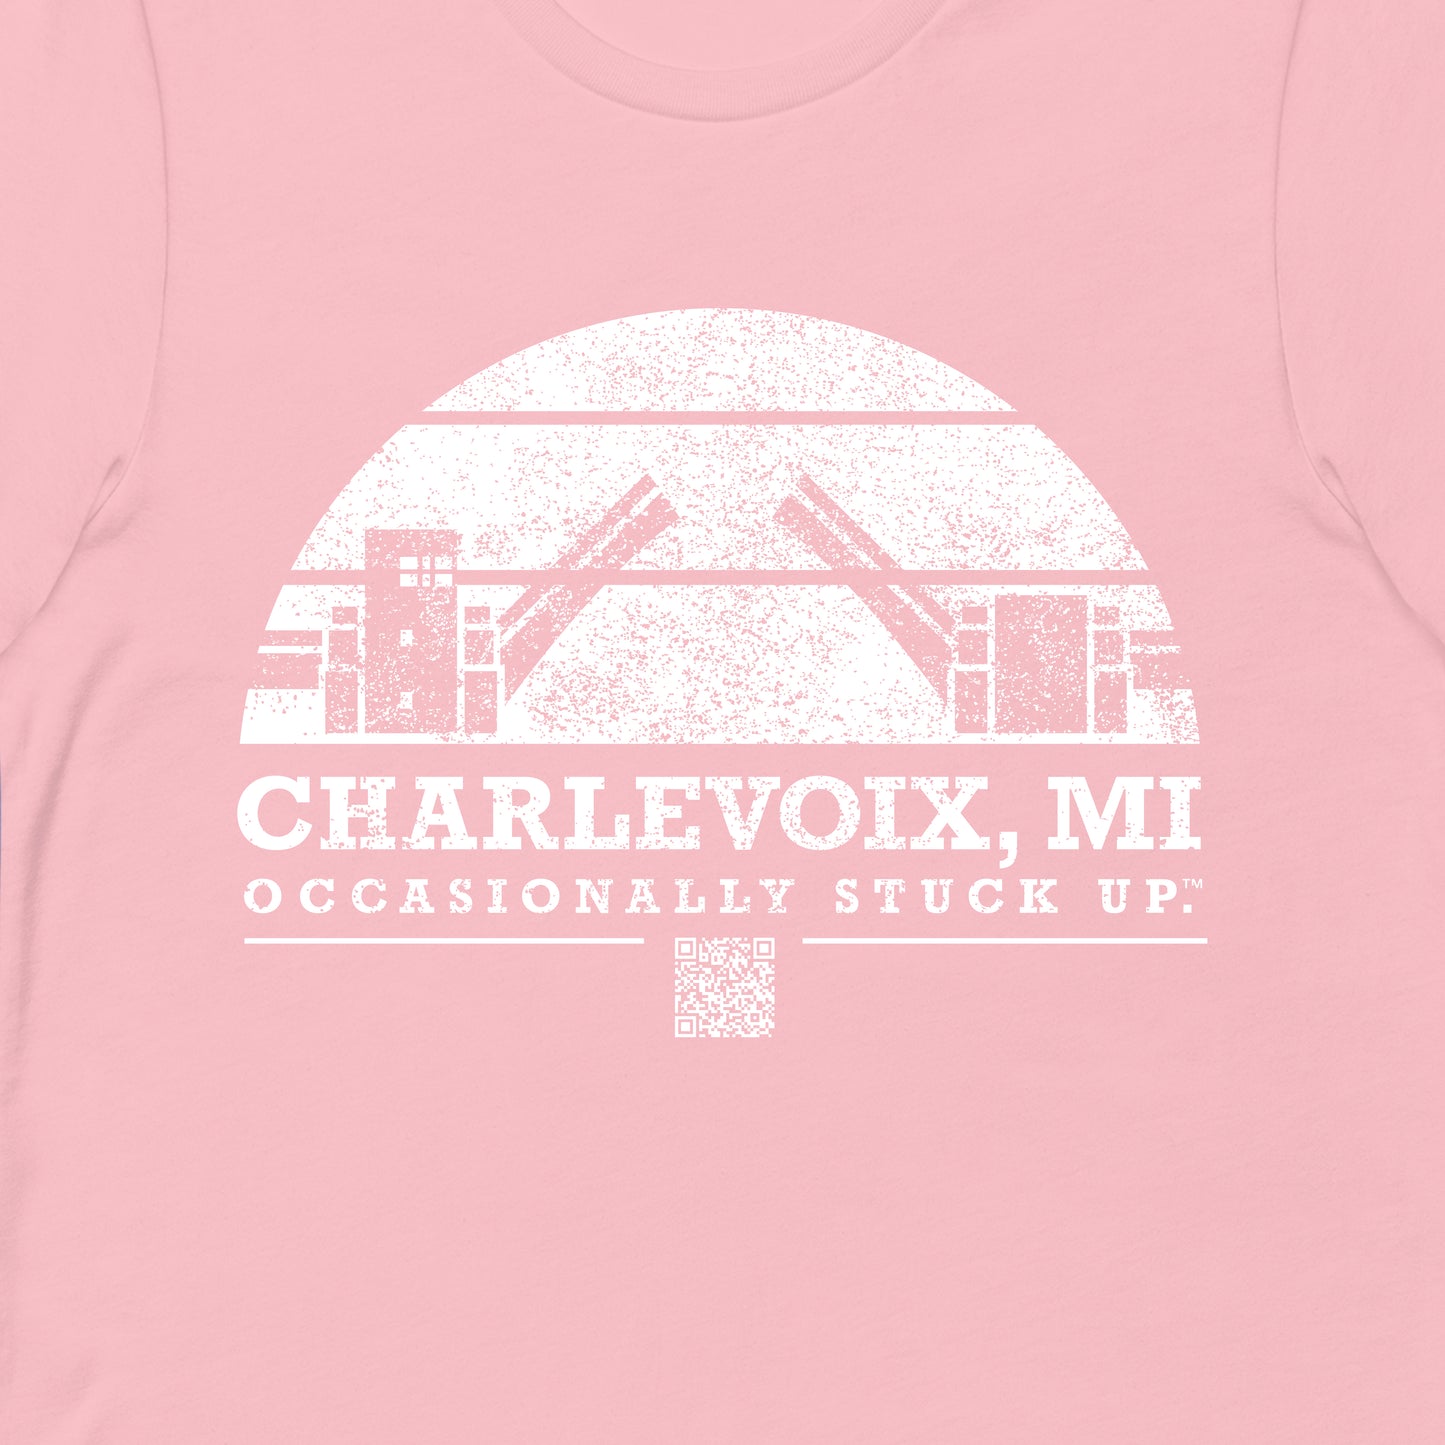 Pink & White Charlevoix "Occasionally Stuck Up" Tee